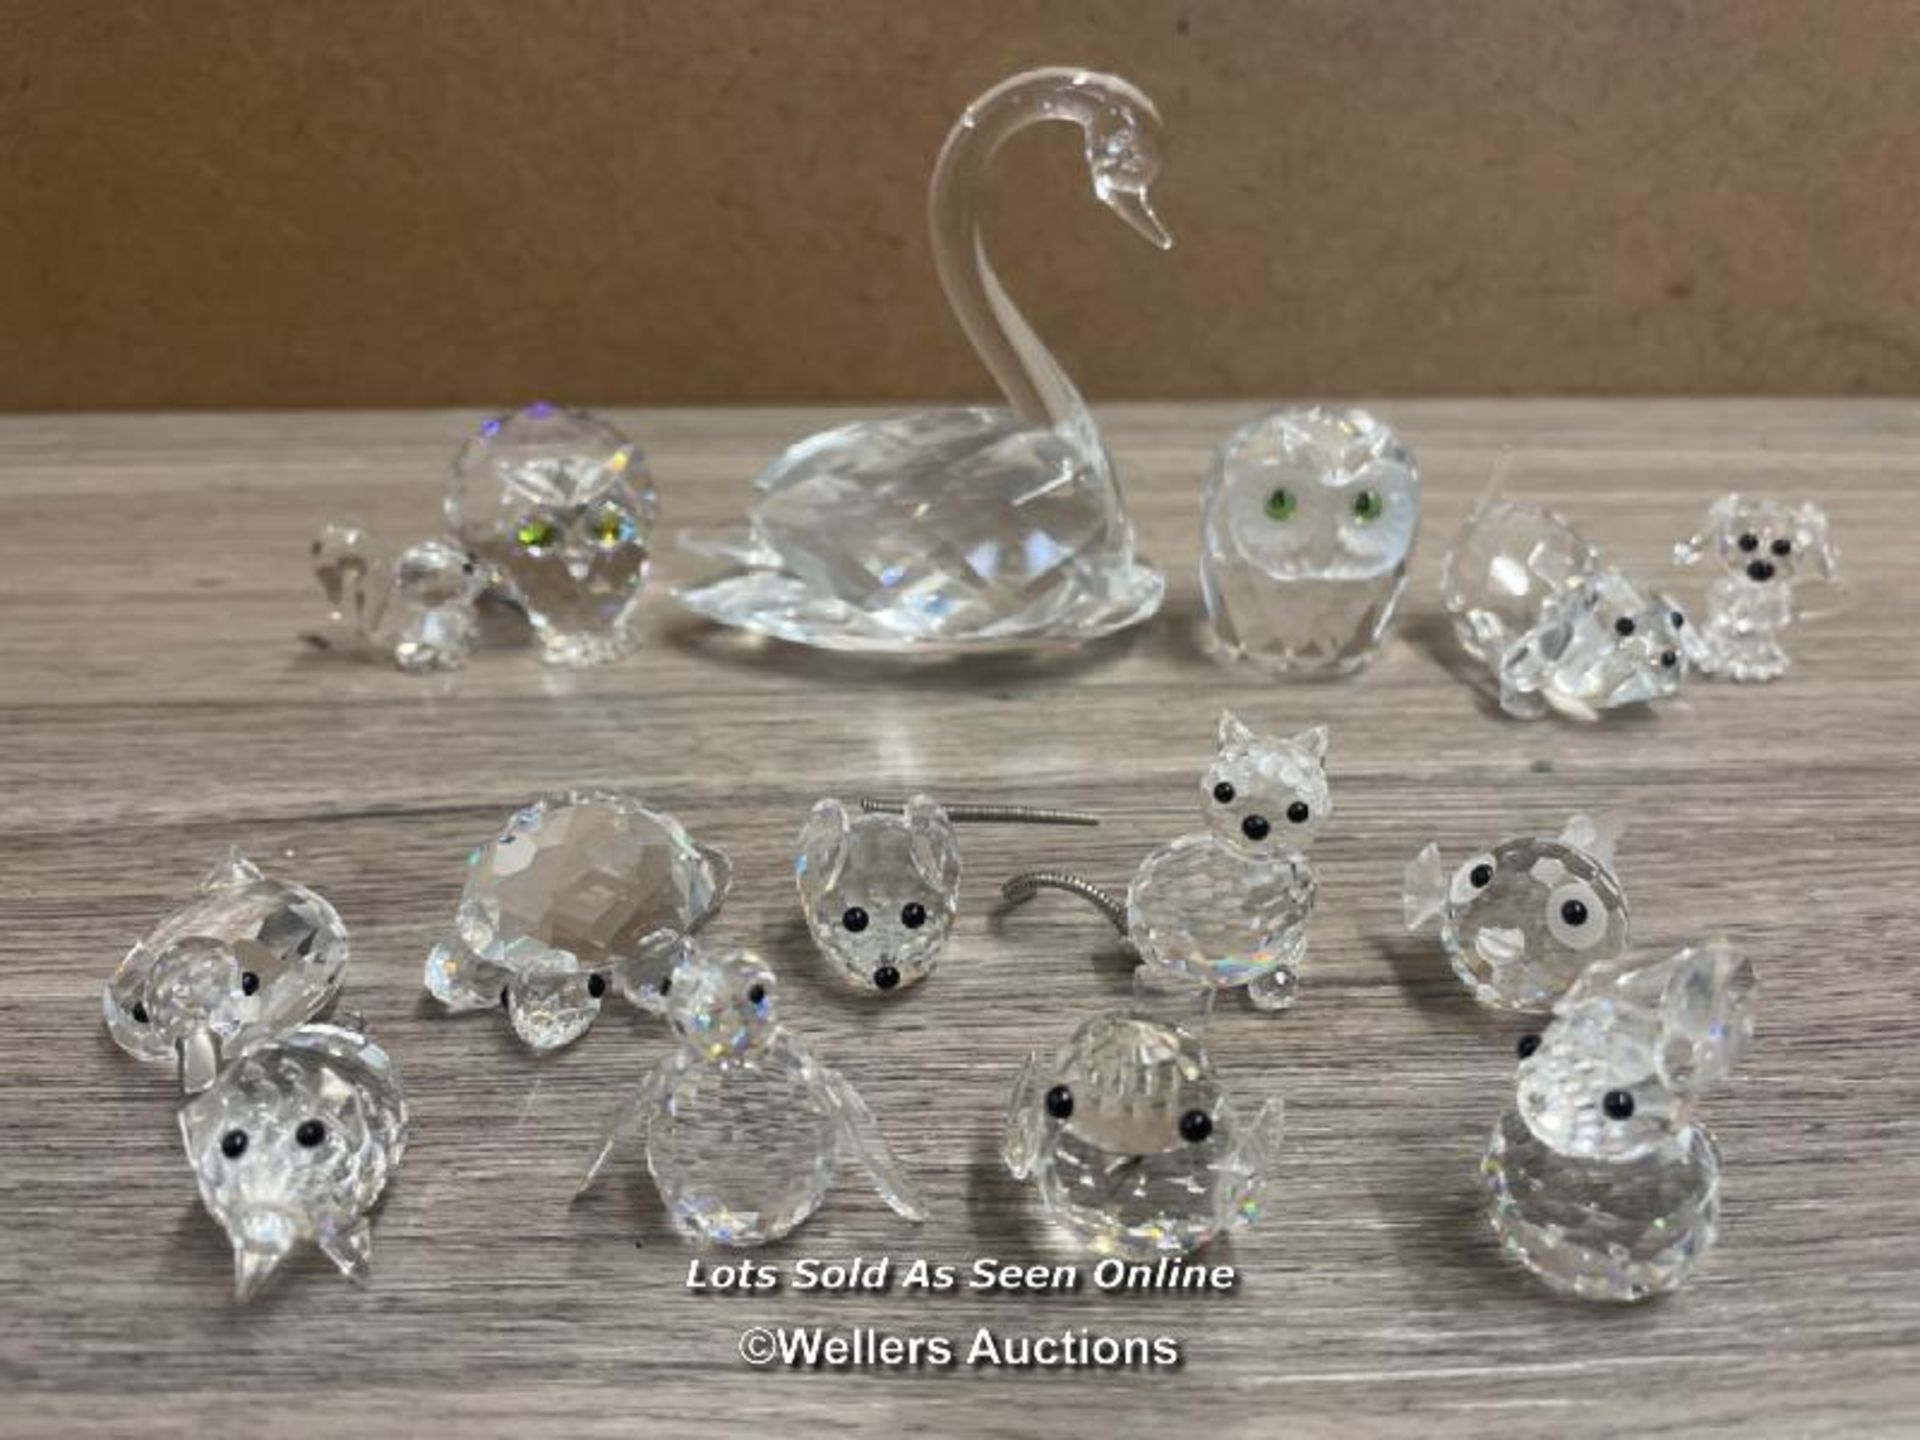 NINE CHRISTAL ANIMALS MARKED SWAROVSKY WITH SIX MORE UNMARKED AND SMALL CHRYSTAL BALL (16)